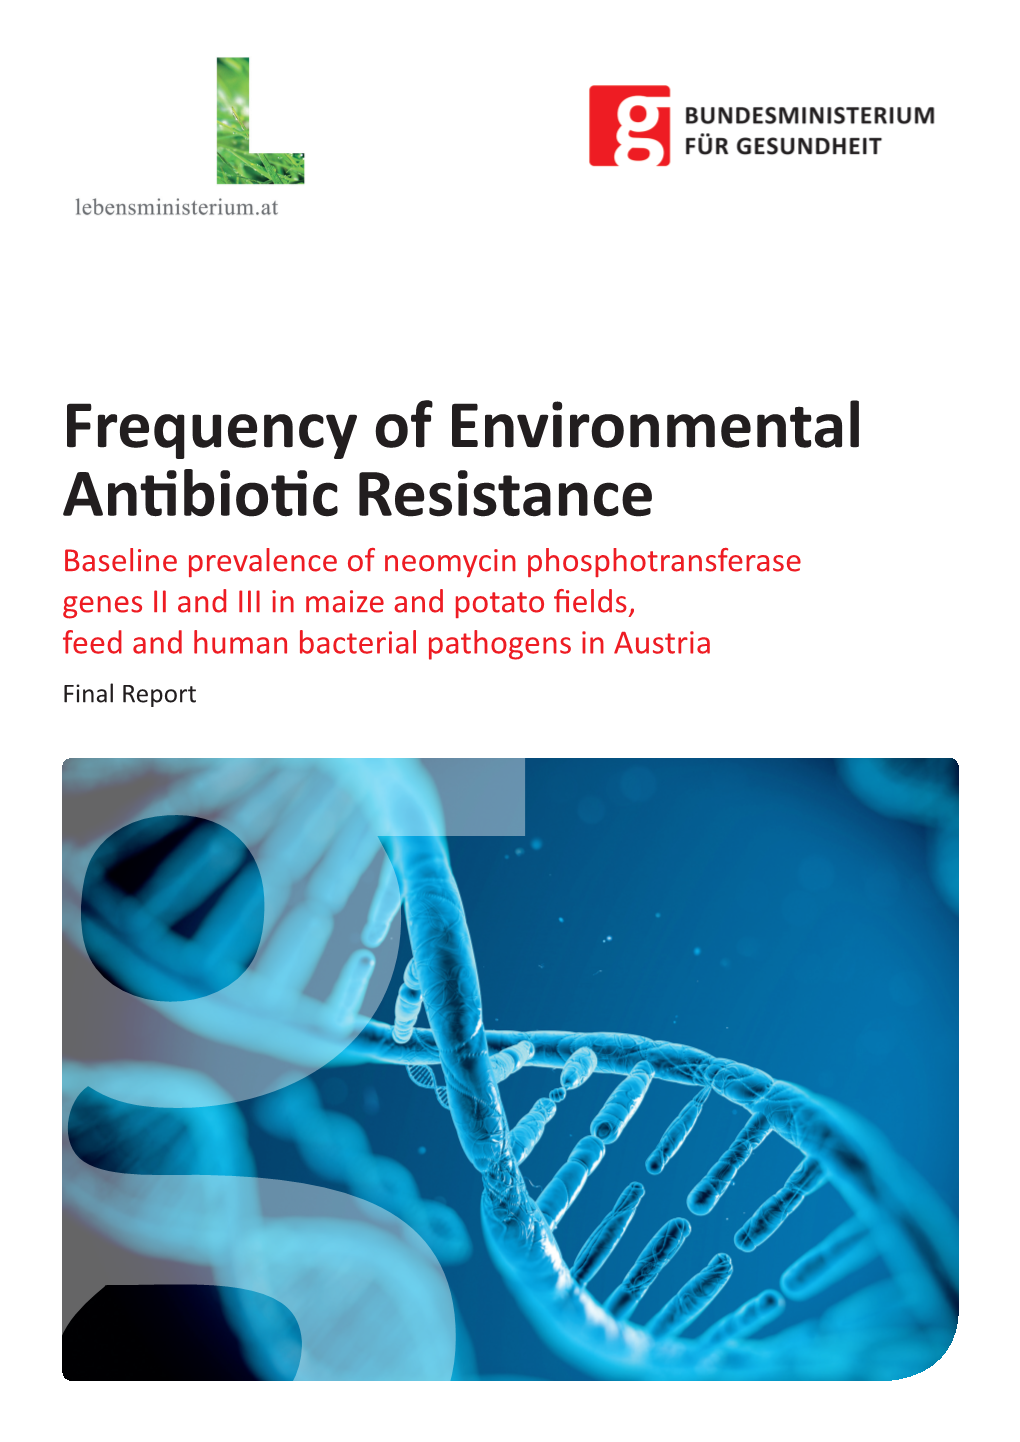 Frequency of Environmental Antibiotic Resistance